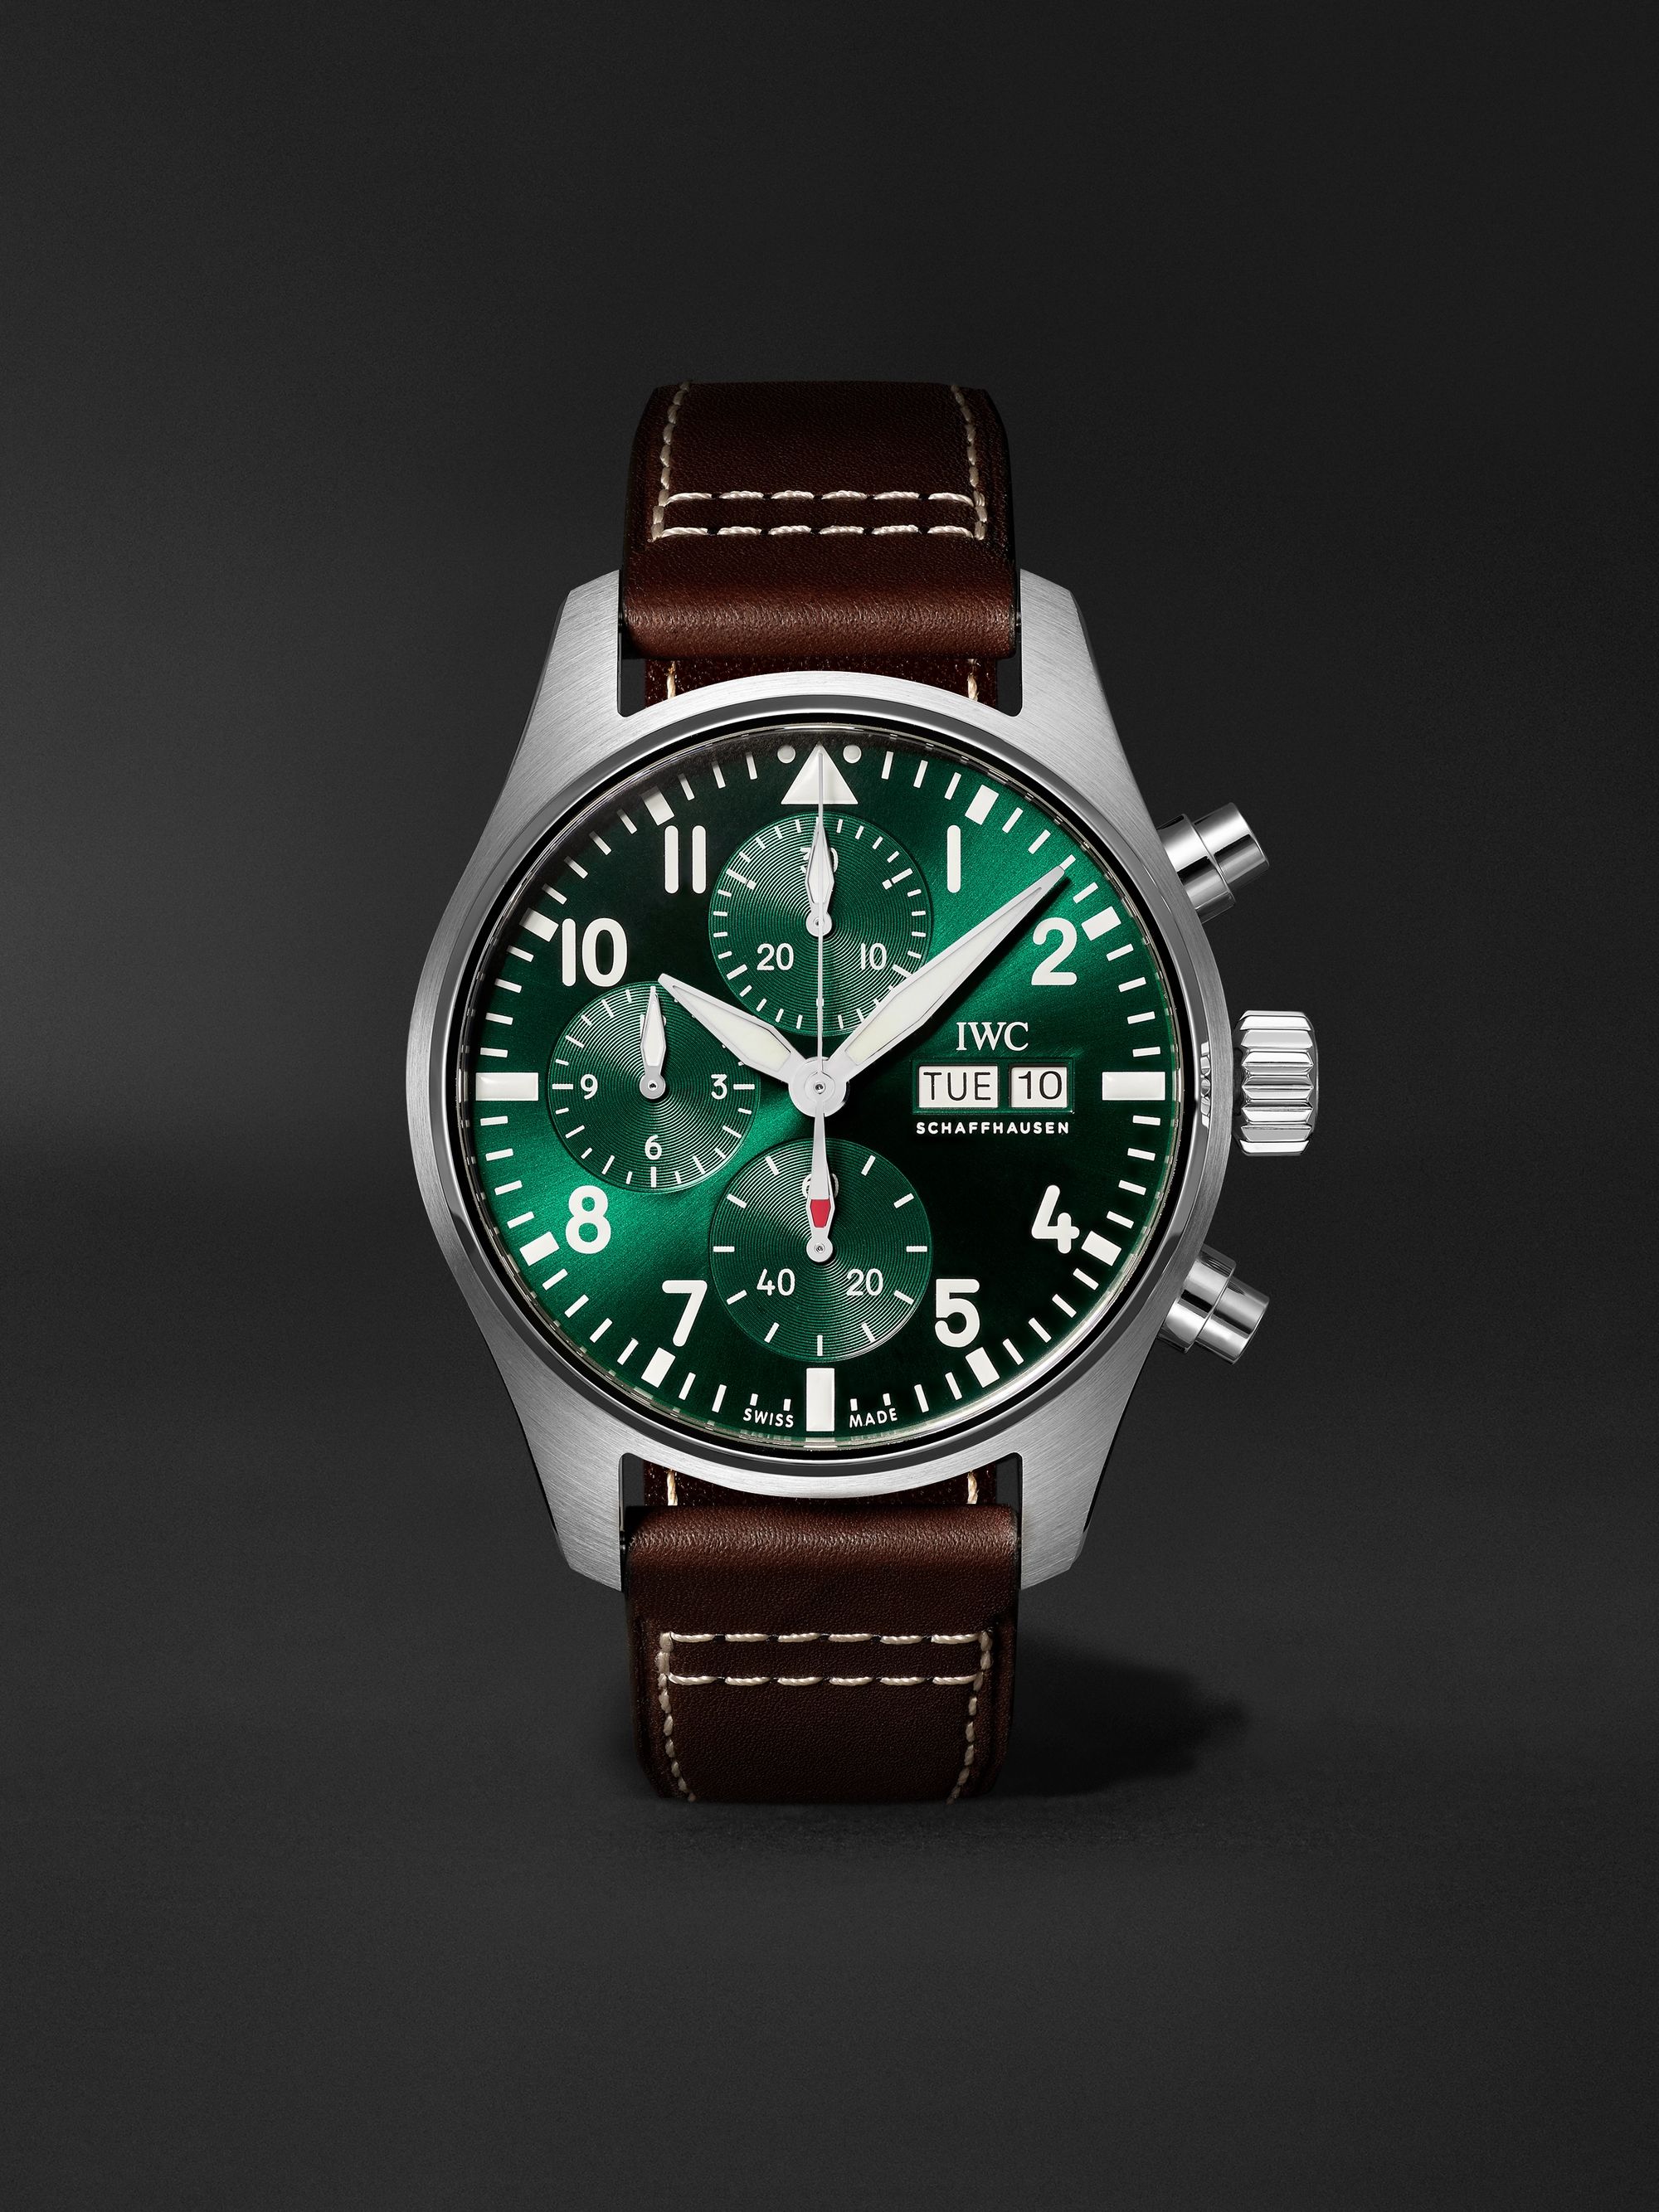 Corporation Geleerde haspel IWC SCHAFFHAUSEN Pilot's Automatic Chronograph 41mm Stainless Steel and  Leather Watch, Ref. No. IW388103 | MR PORTER